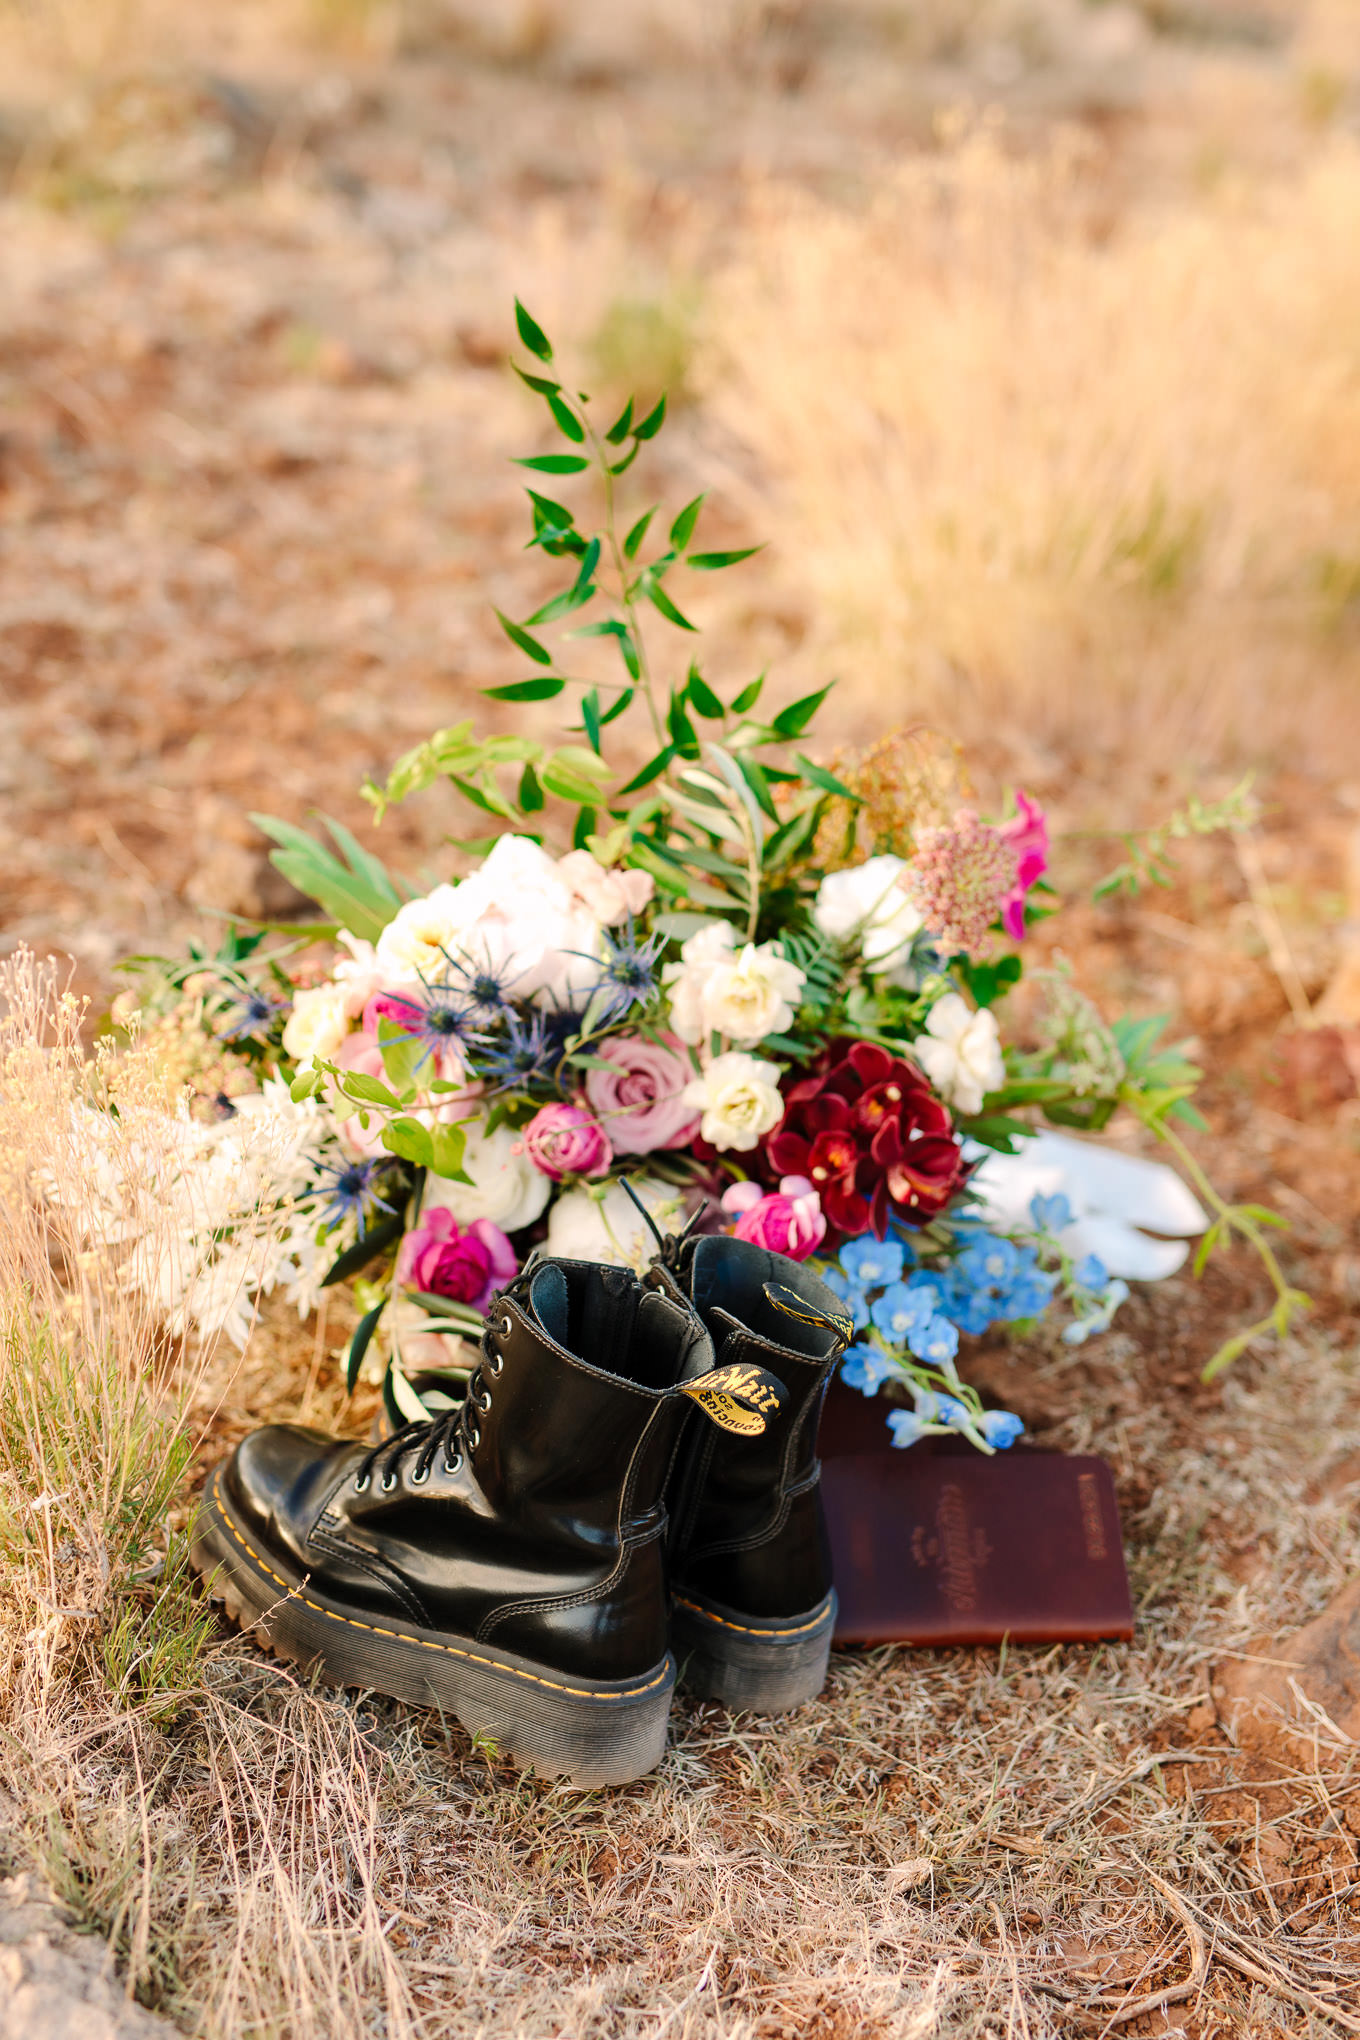 Dr. Martens with vow books and bouquet | Zion Under Canvas Elopement at Sunrise | Colorful adventure elopement photography | #utahelopement #zionelopement #zionwedding #undercanvaszion #sunriseelopement  Source: Mary Costa Photography | Los Angeles